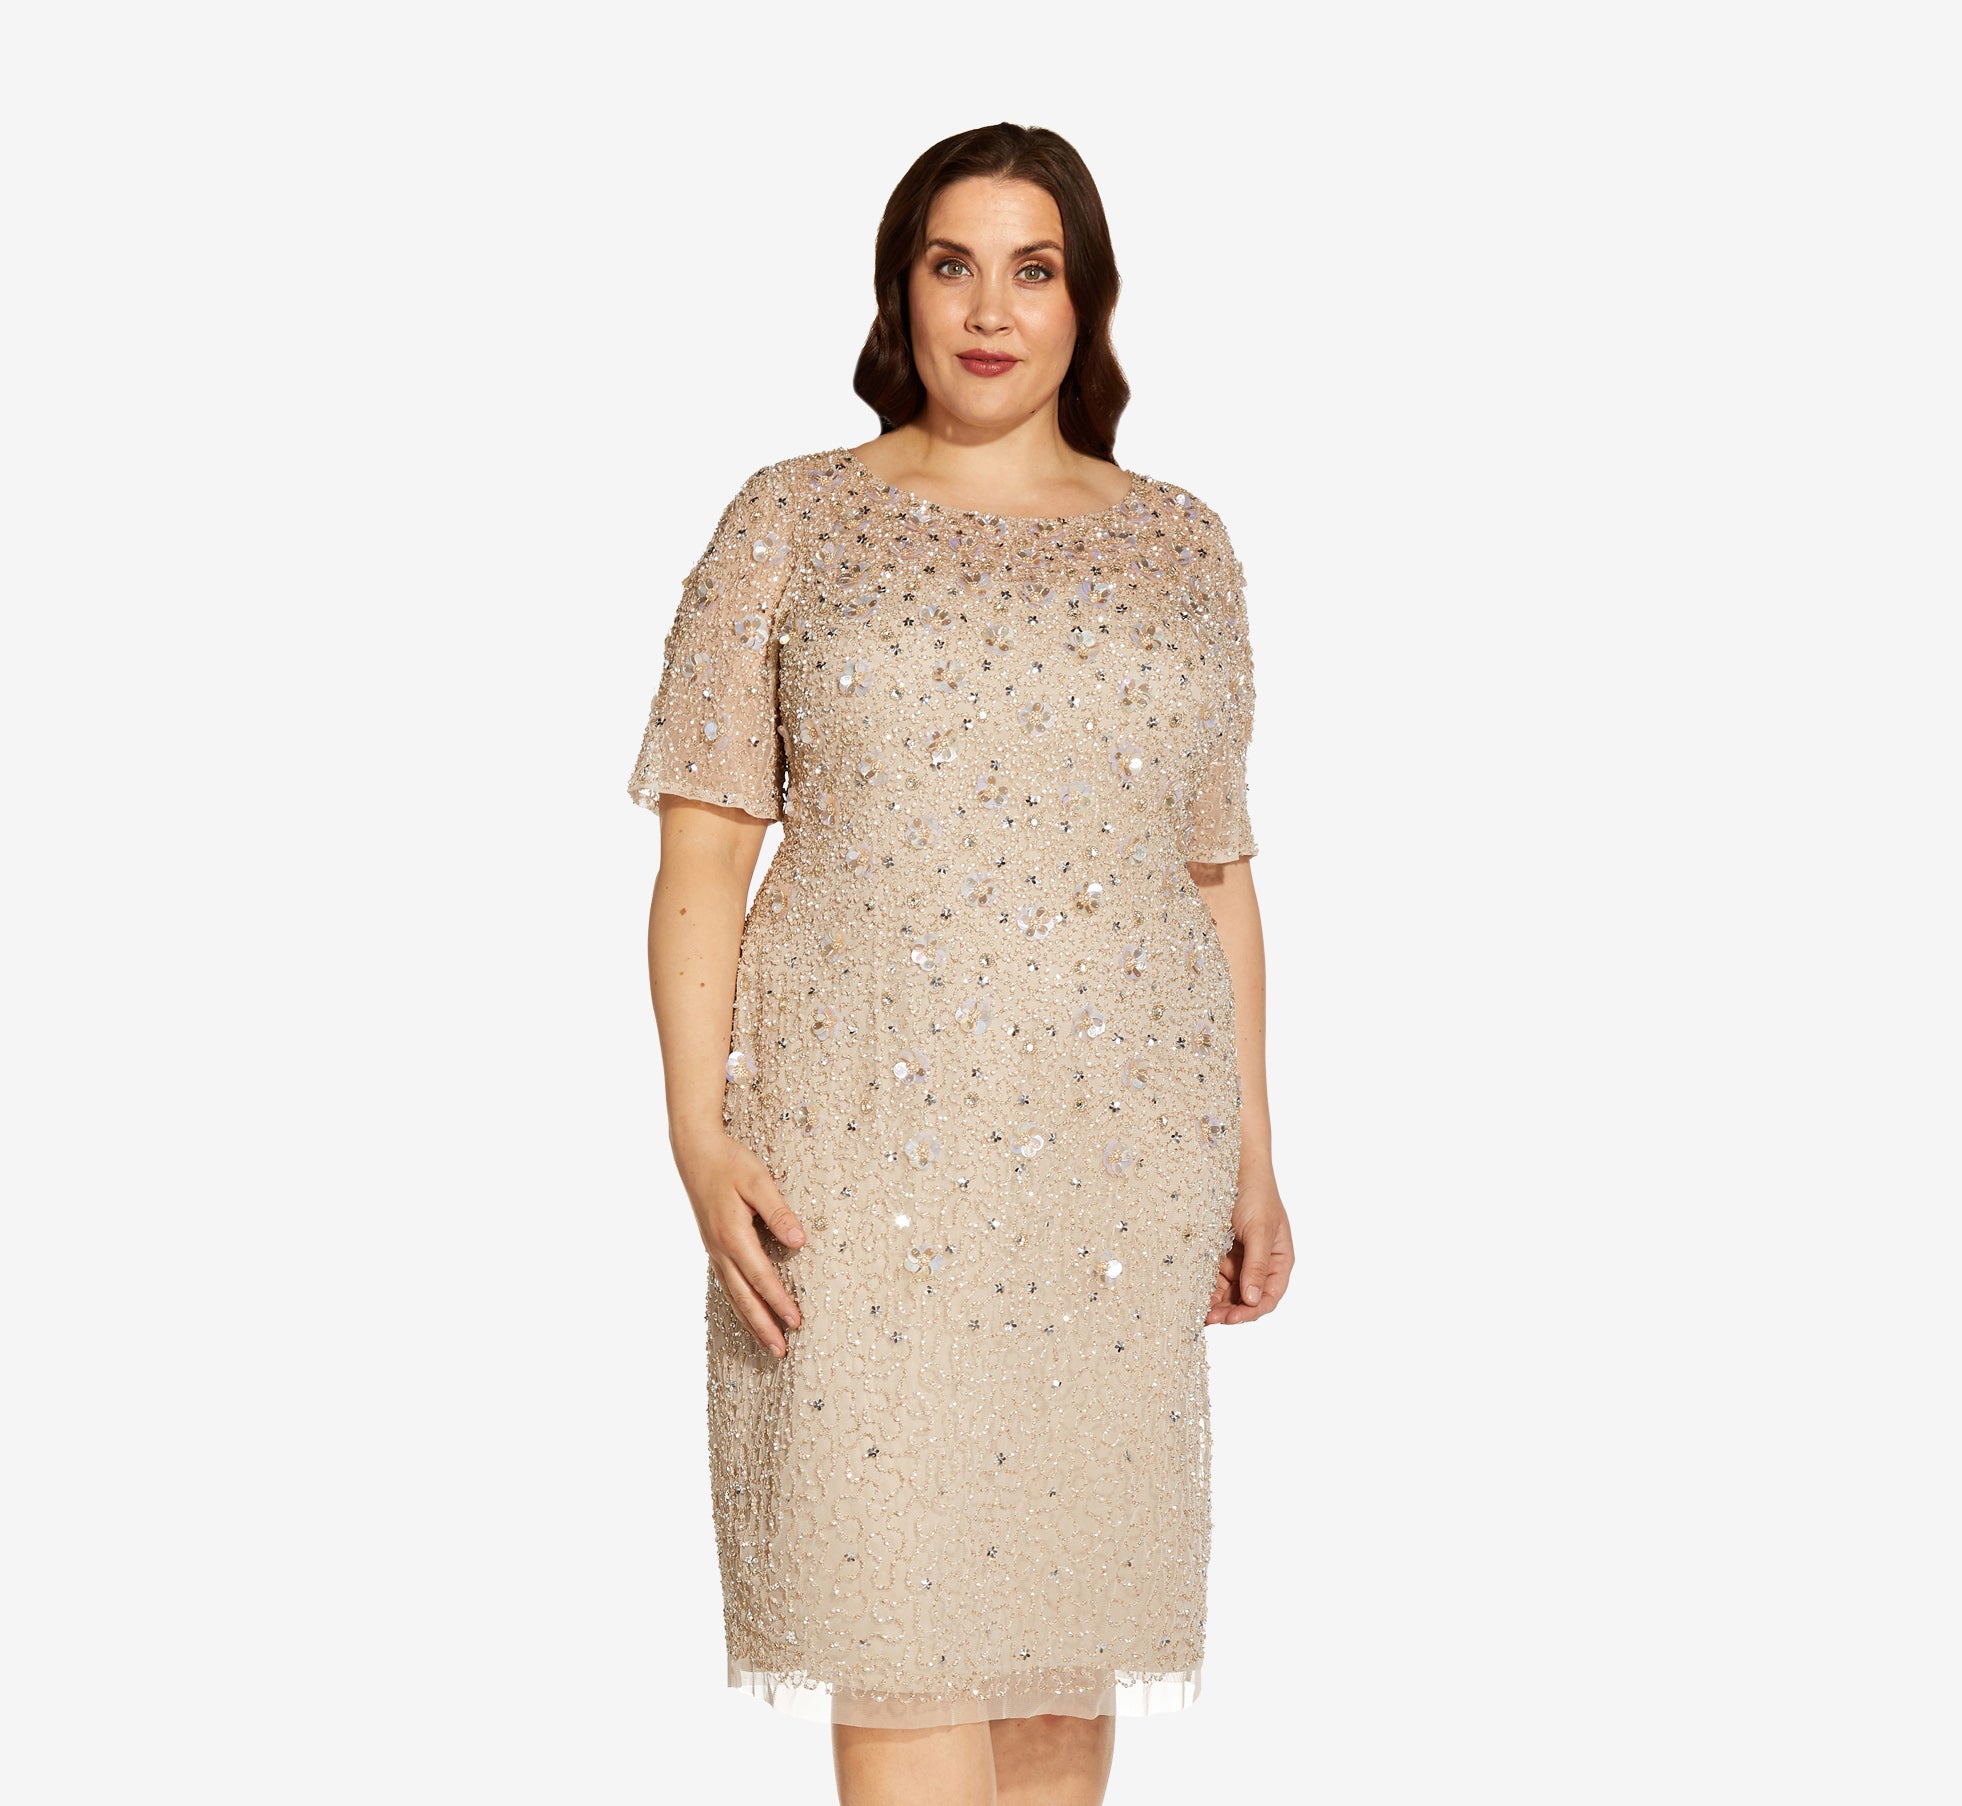 Atomisk Frontier Bank Plus Size Beaded Cocktail Dress In Biscotti | Adrianna Papell